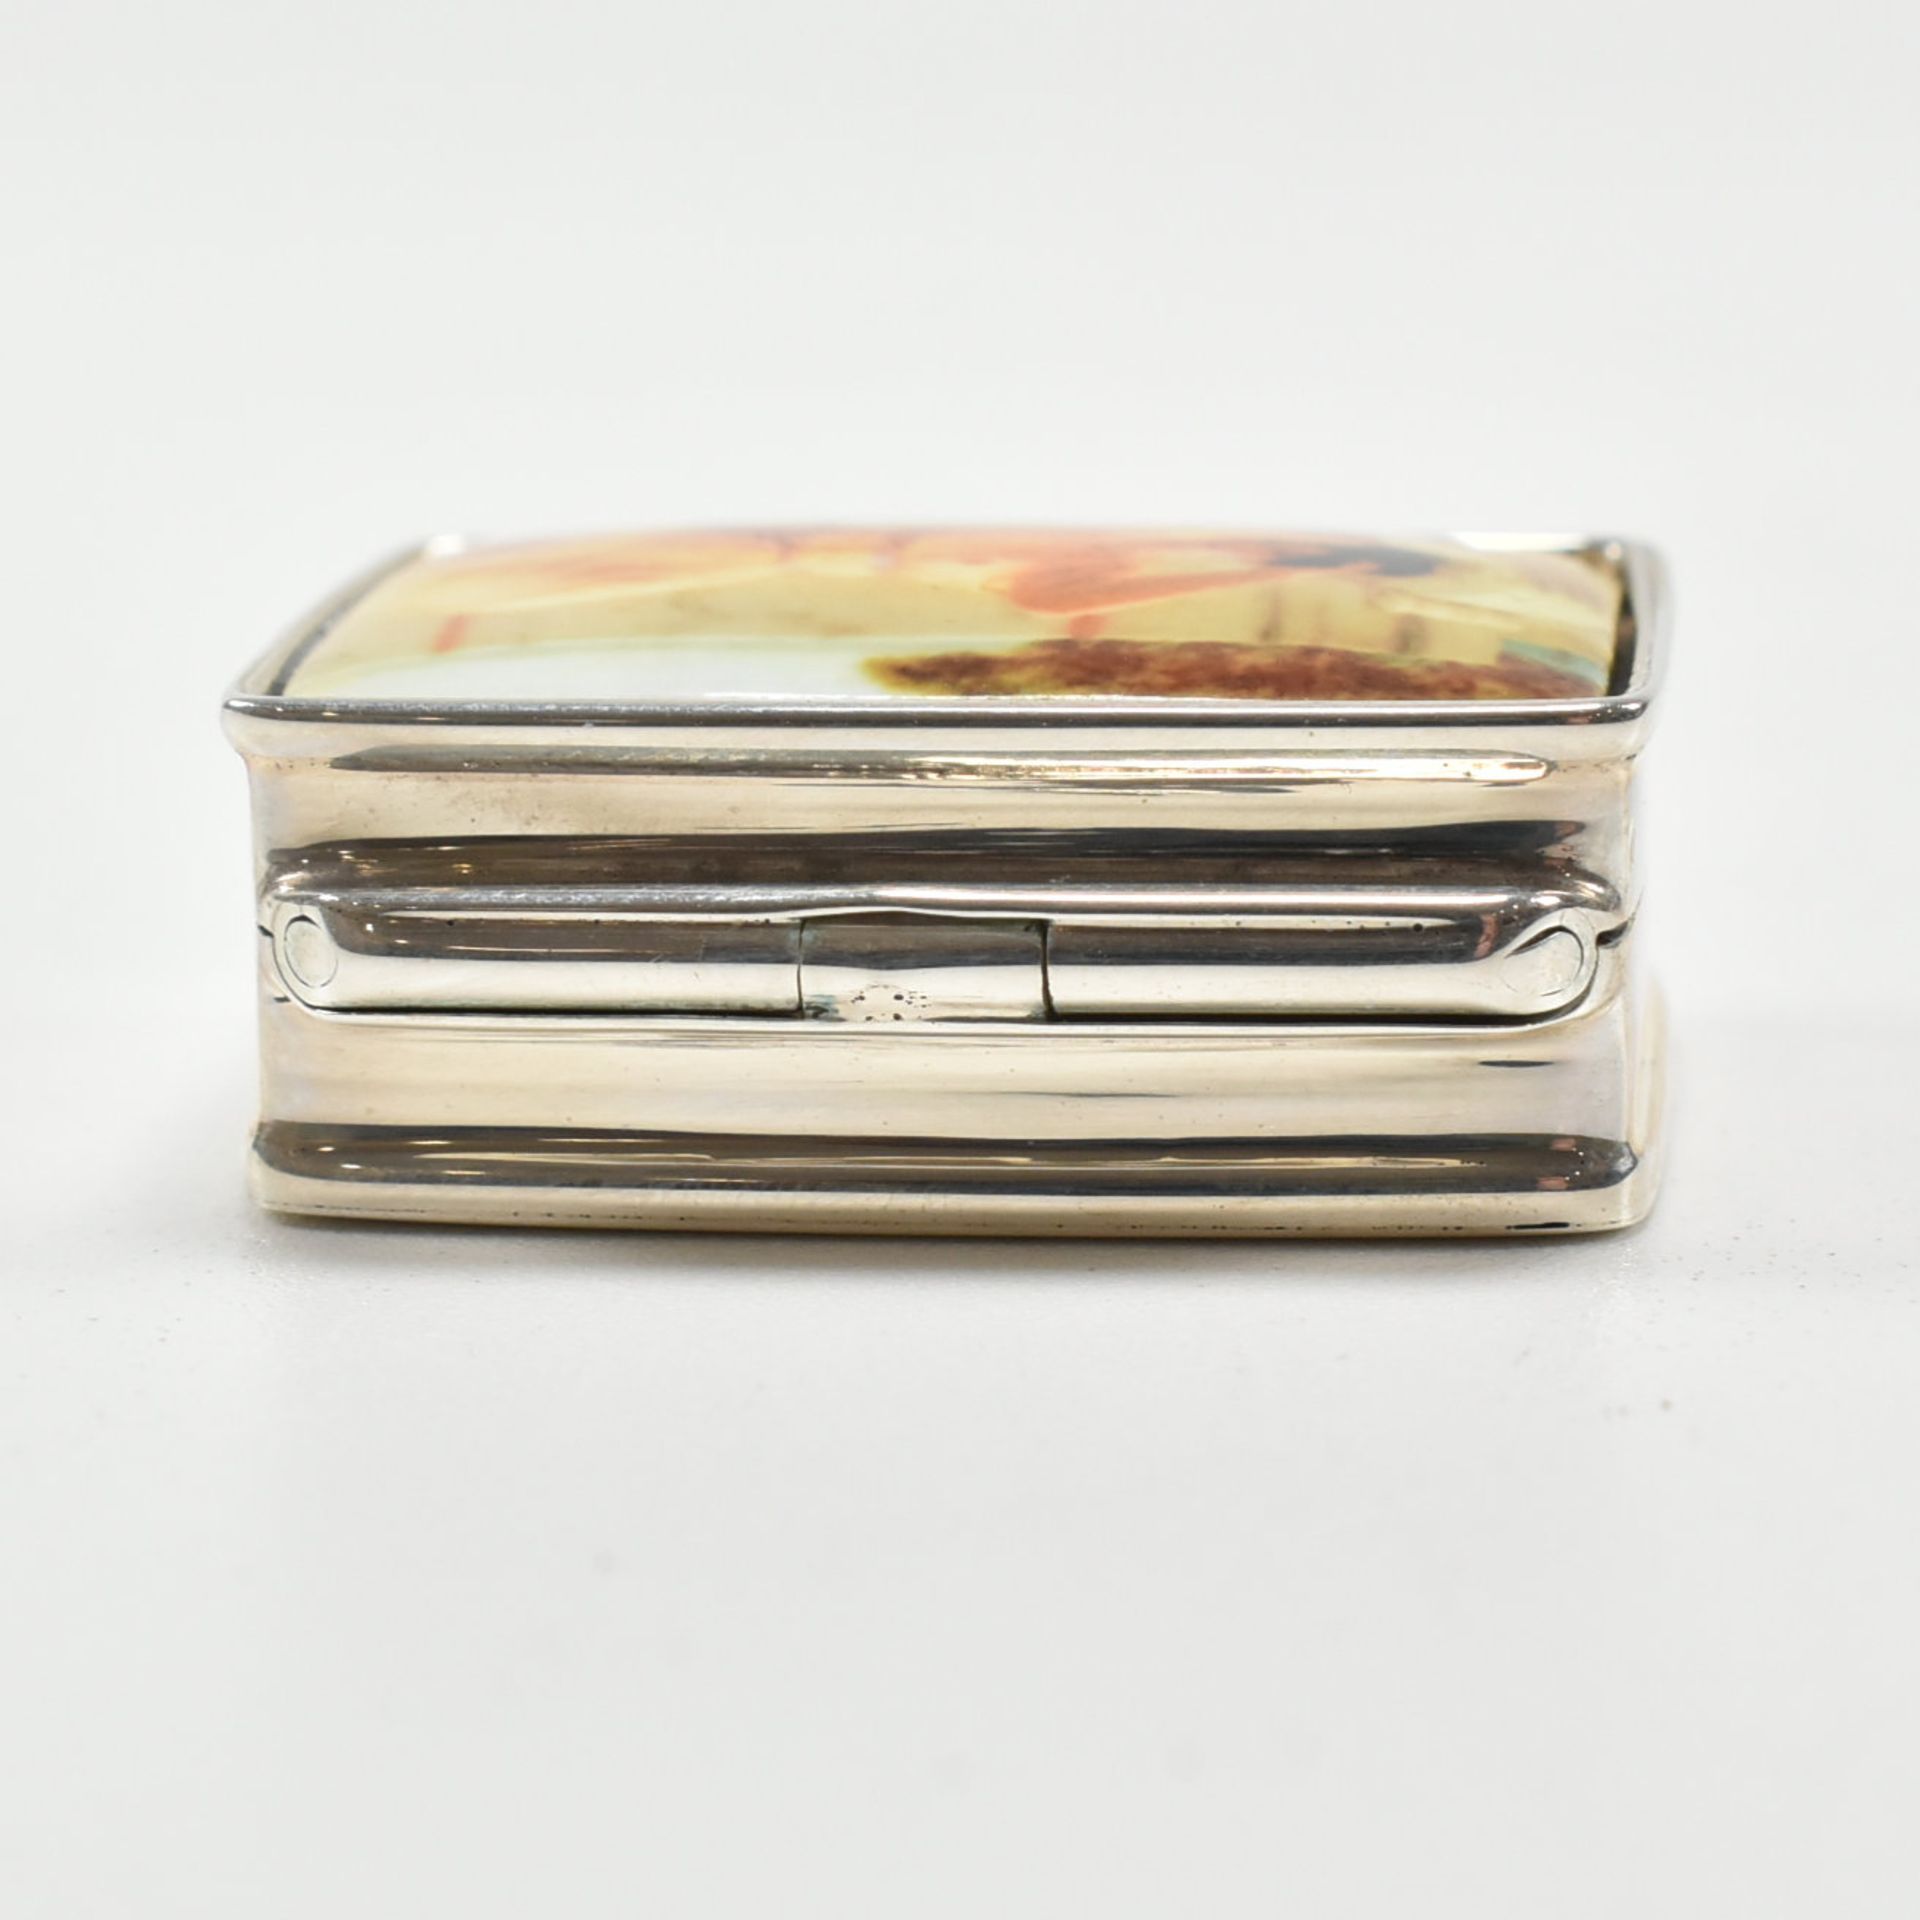 CONTEMPORARY STERLING SILVER PILL BOX WITH EROTIC ENAMEL PANEL - Image 5 of 7